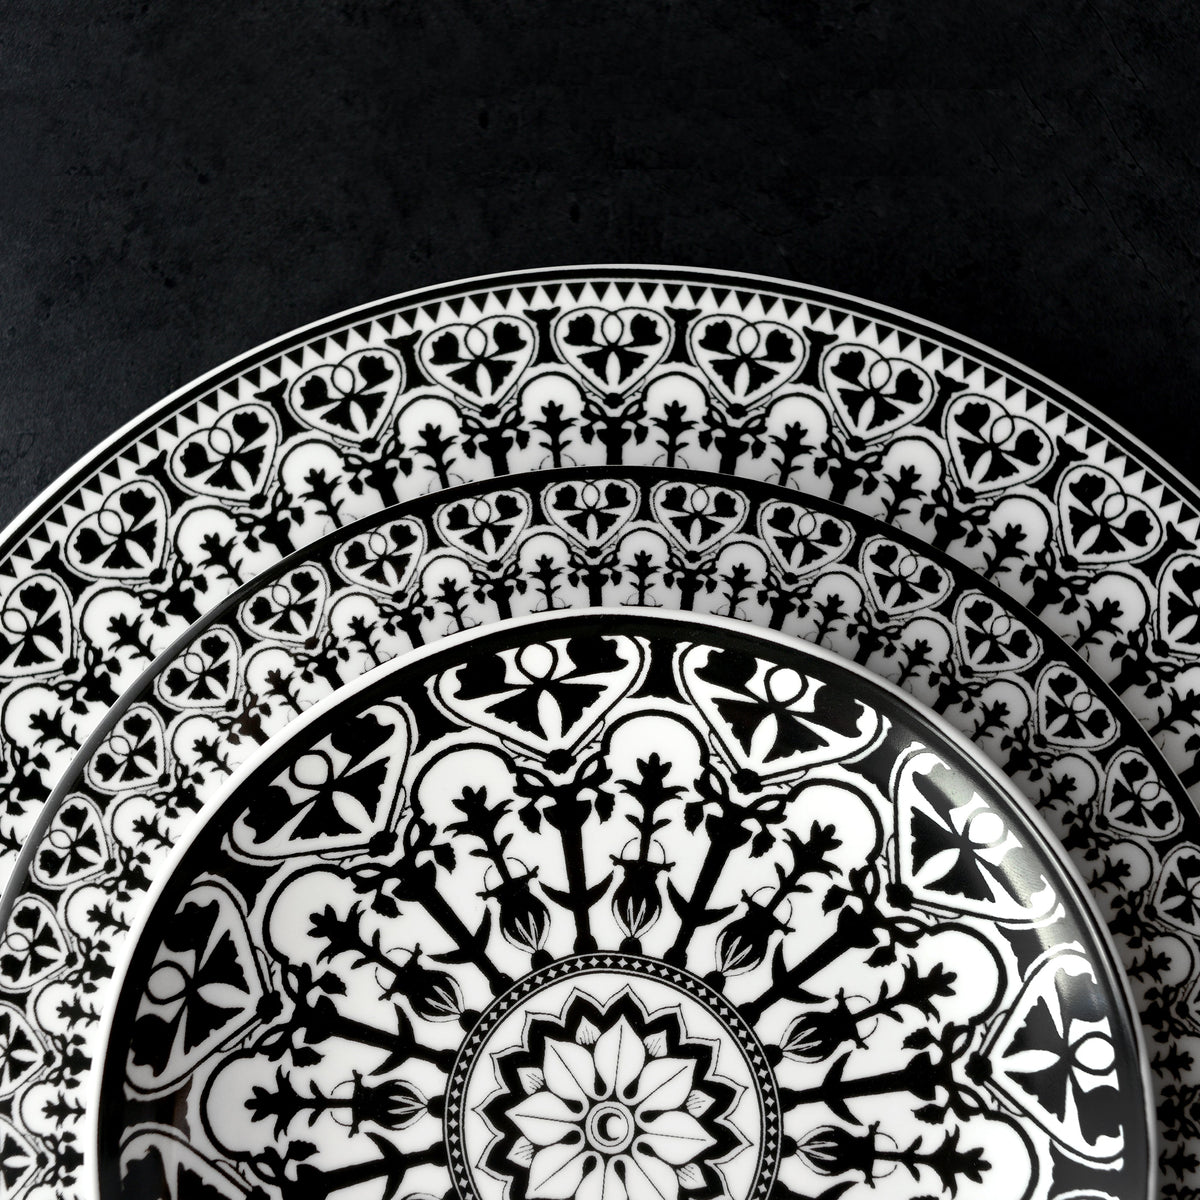 A black and white Casablanca Canapé plate with an ornate pattern from the Geometrics Collection by Caskata Artisanal Home.